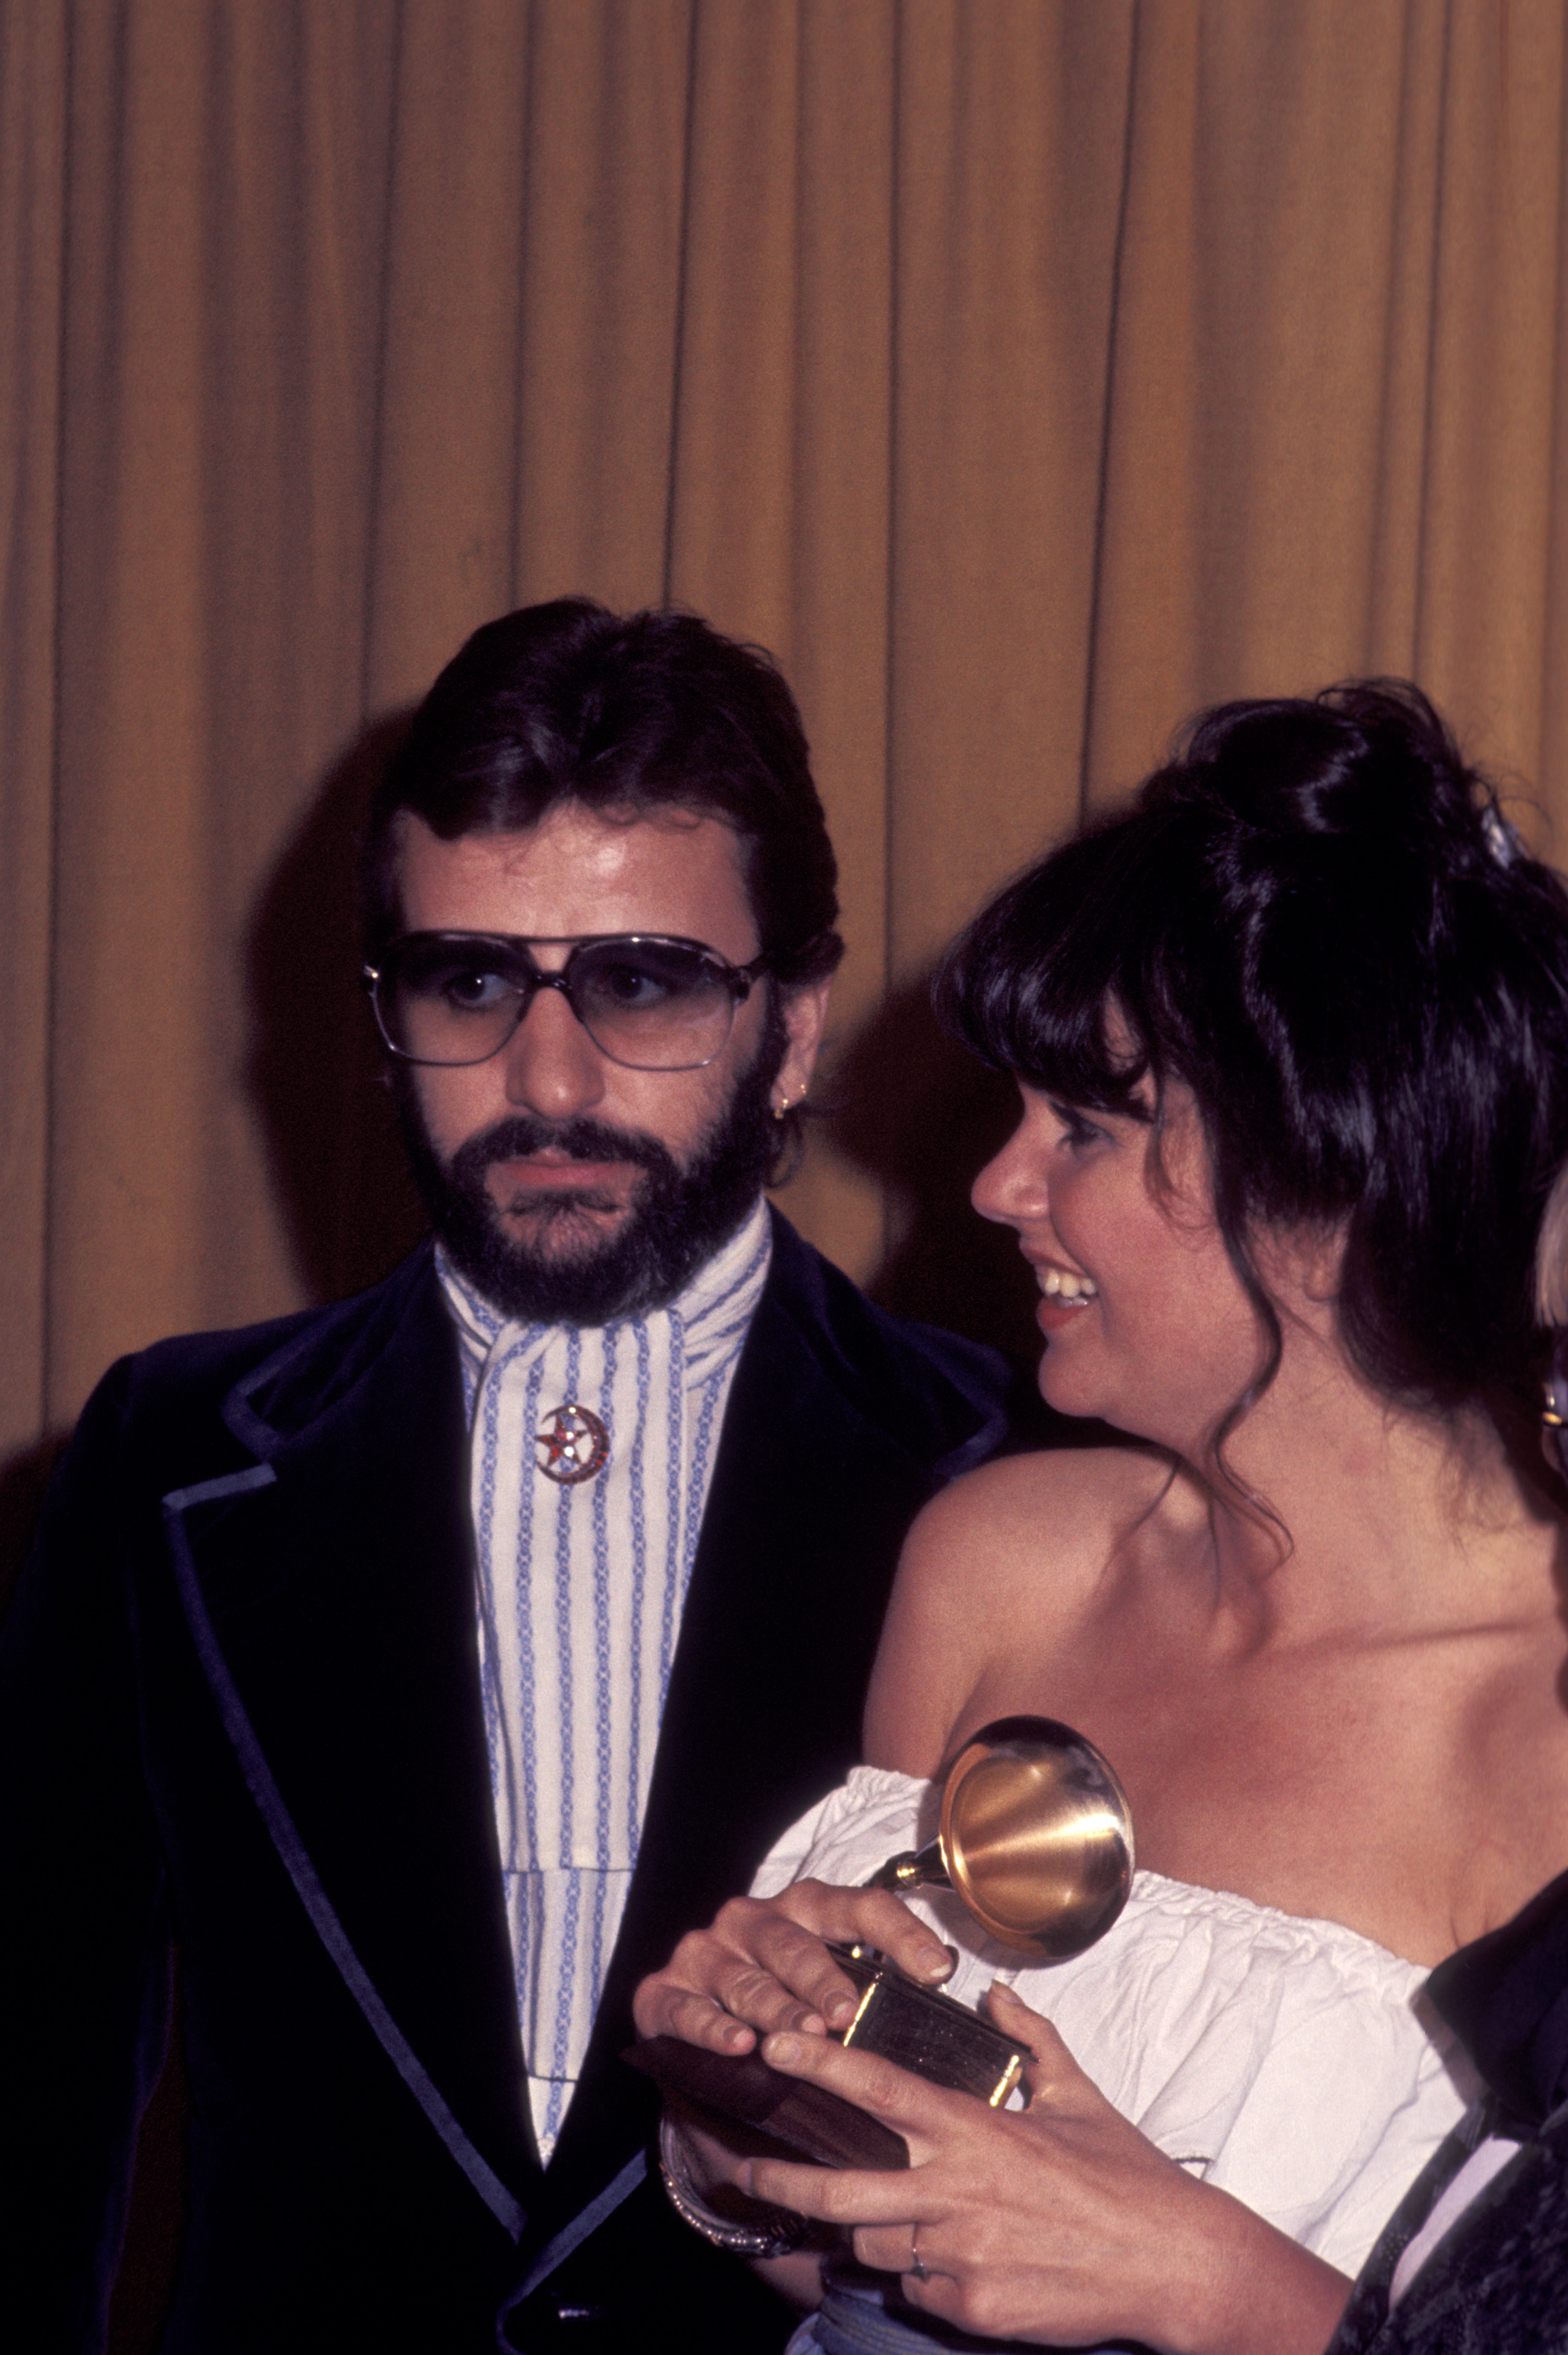 Ringo Starr and Linda Rondstadt at the 19th Annual Grammy Awards | Source: Getty Images